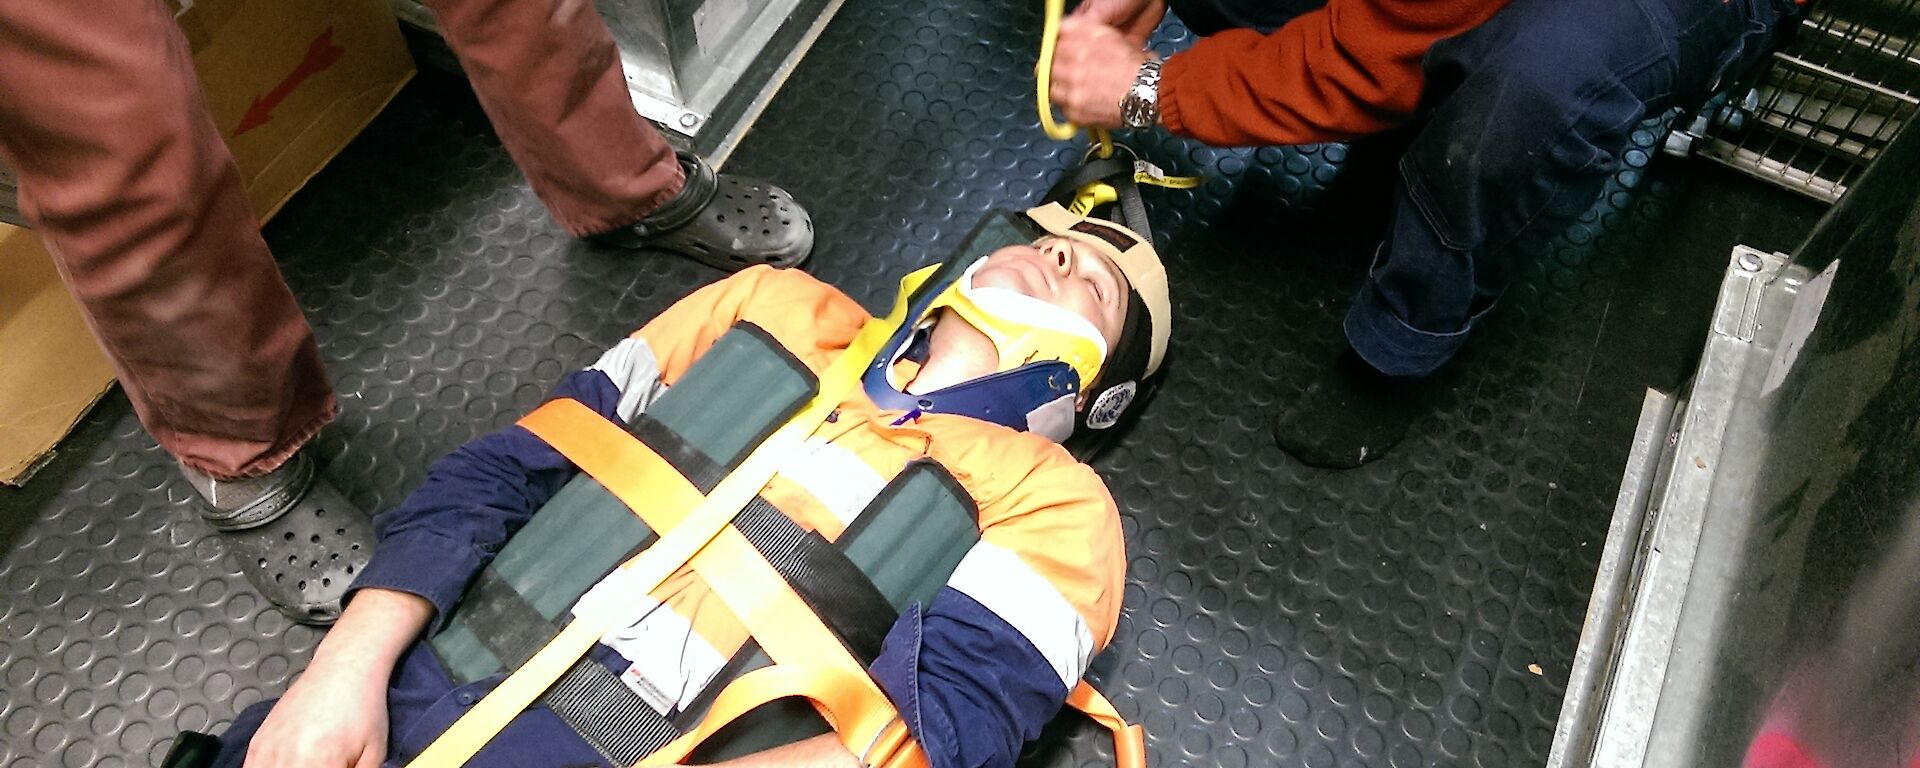 After finding Vas as part of a SAR exercise on station the second exercise was to get him out of the basement and into the surgery as this image shows